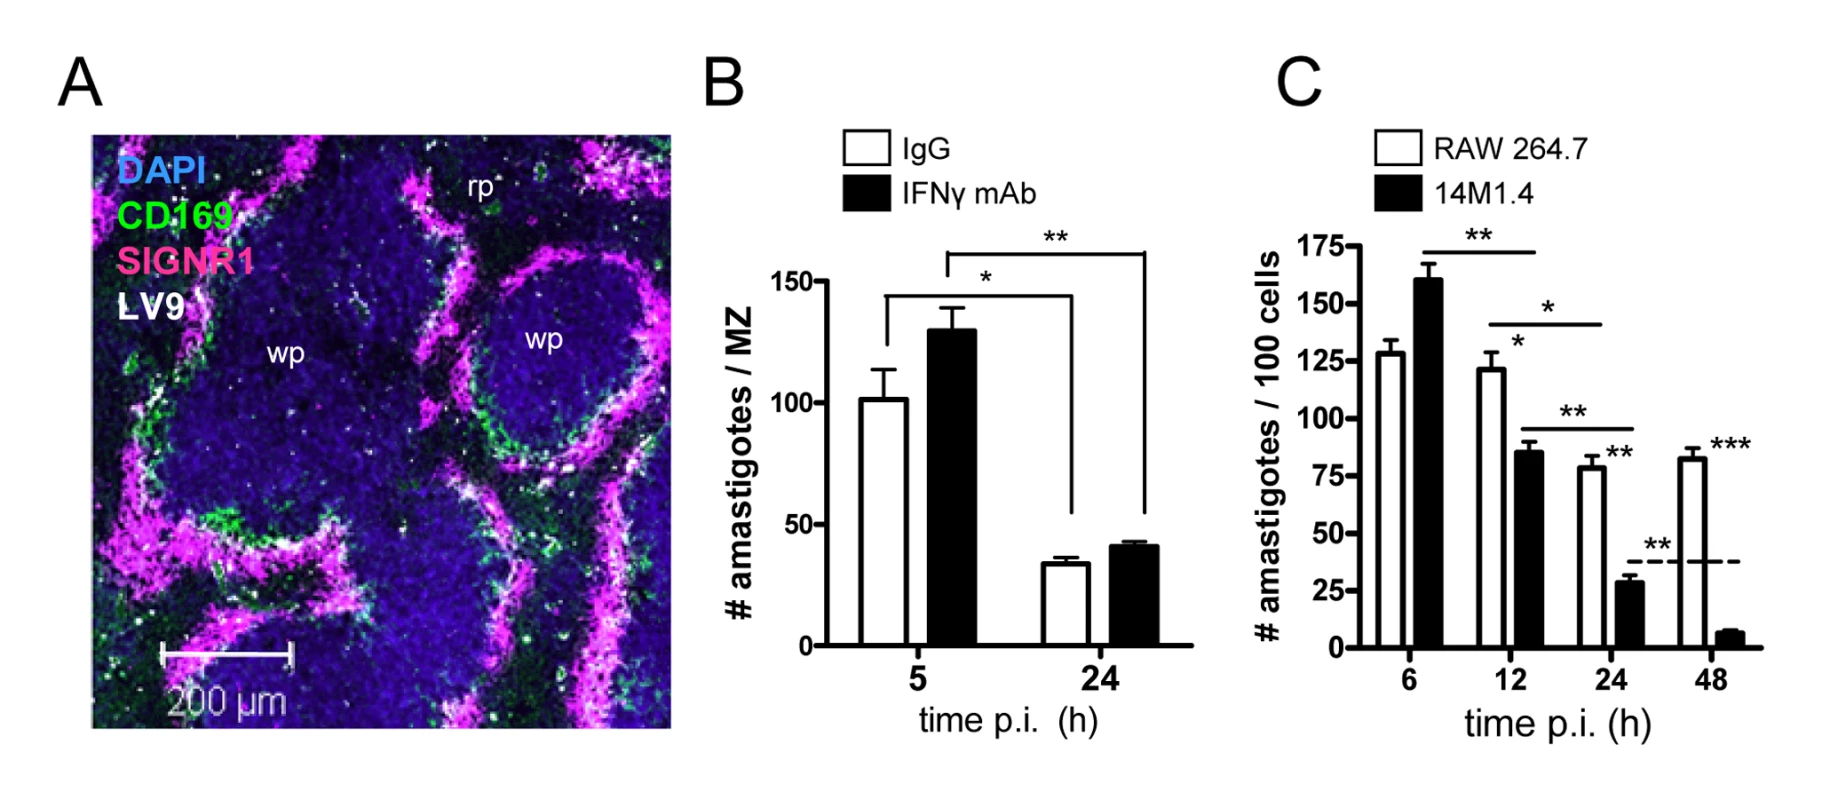 Splenic marginal zone macrophages and marginal metallophilic macrophages control <i>L. donovani</i> by an IFN-γ independent mechanism.